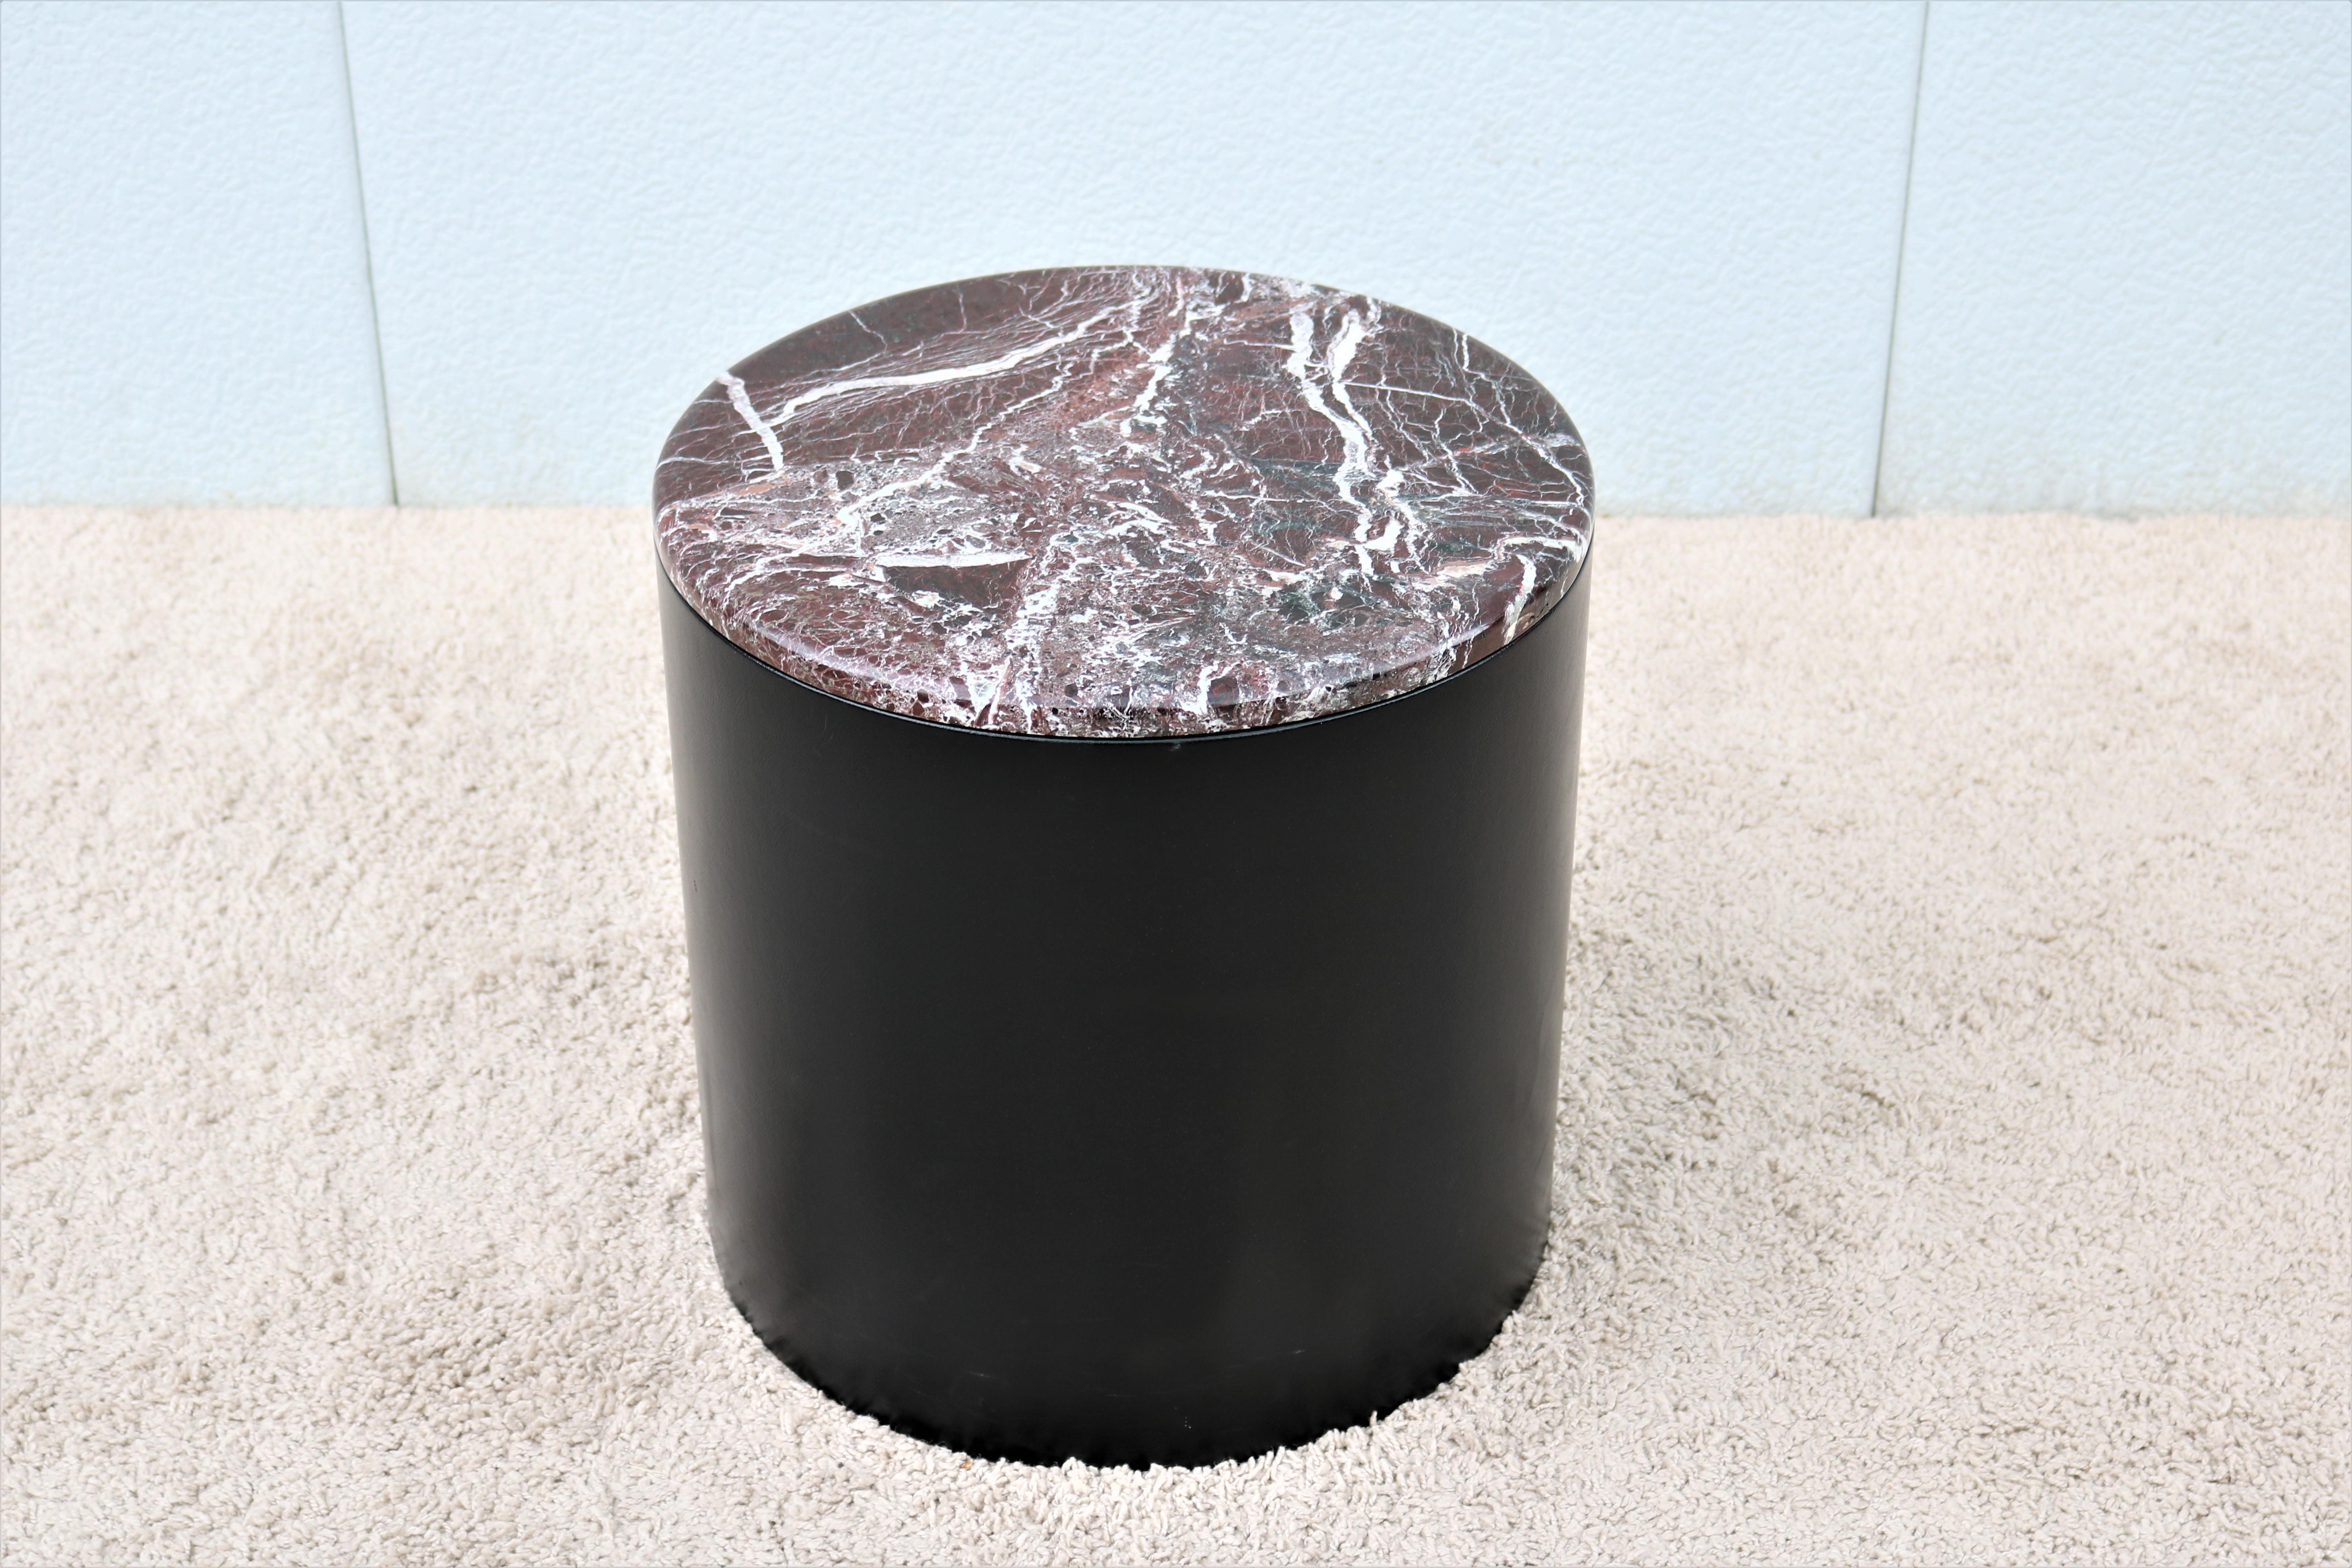 Stunning vintage Paul Mayen style marble top cylinder drum side or end table.
Classic American Mid-Century Modern Designed in 1970 and remains a current timeless and elegant design today.
The Drum table address a number of functional requirements